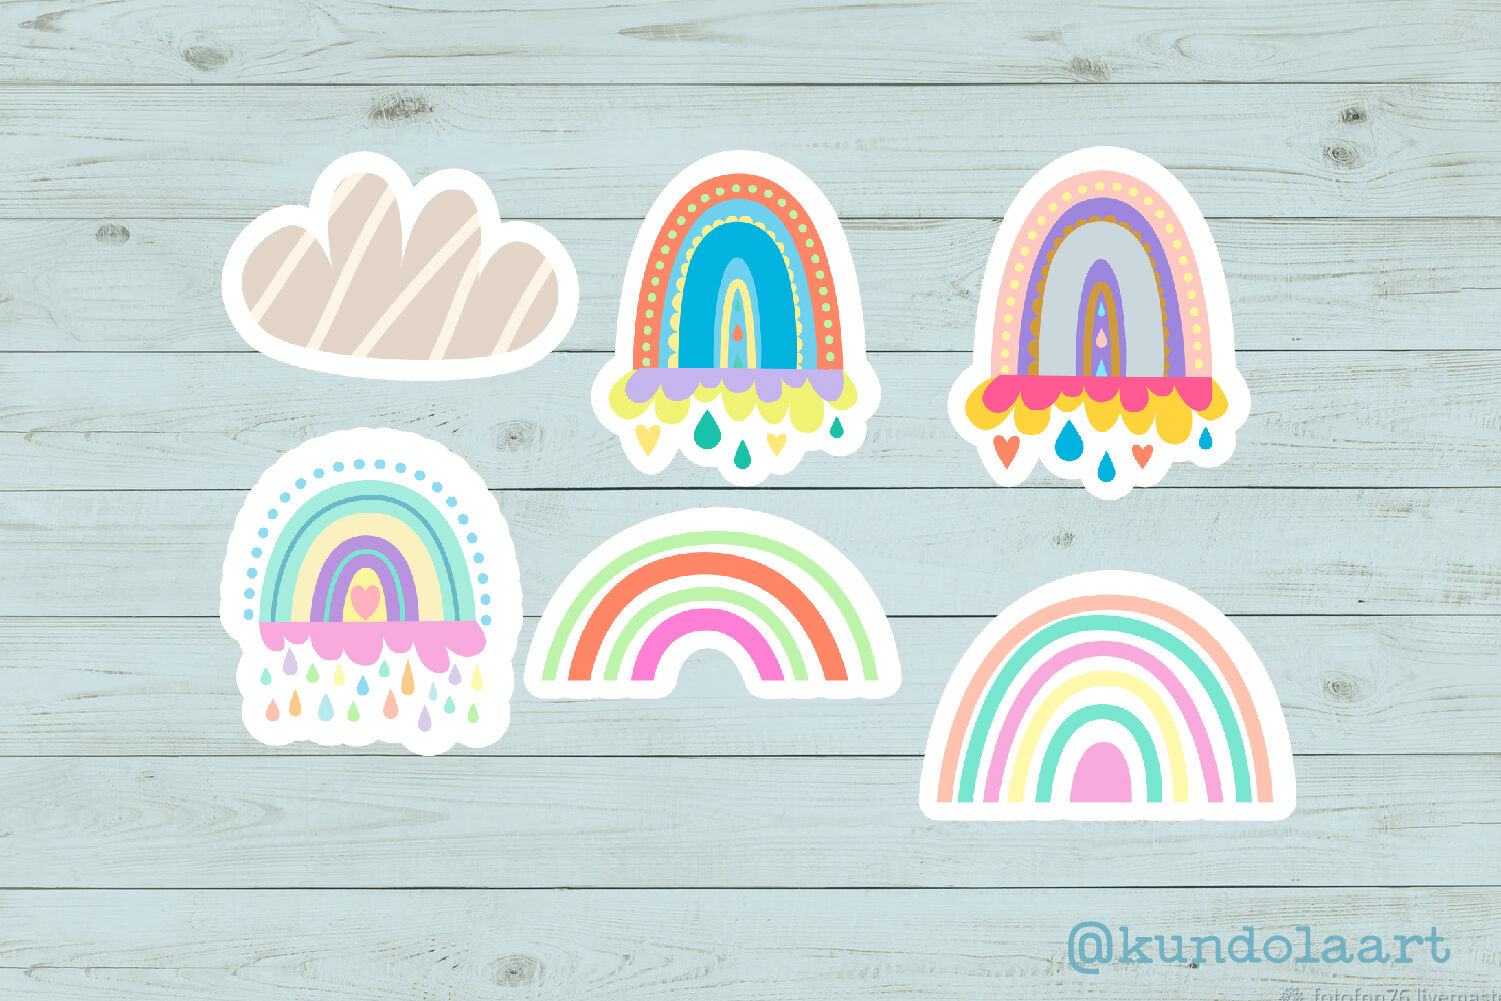 Thank you! Rainbow stickers. PNG. Digital and printed files. By